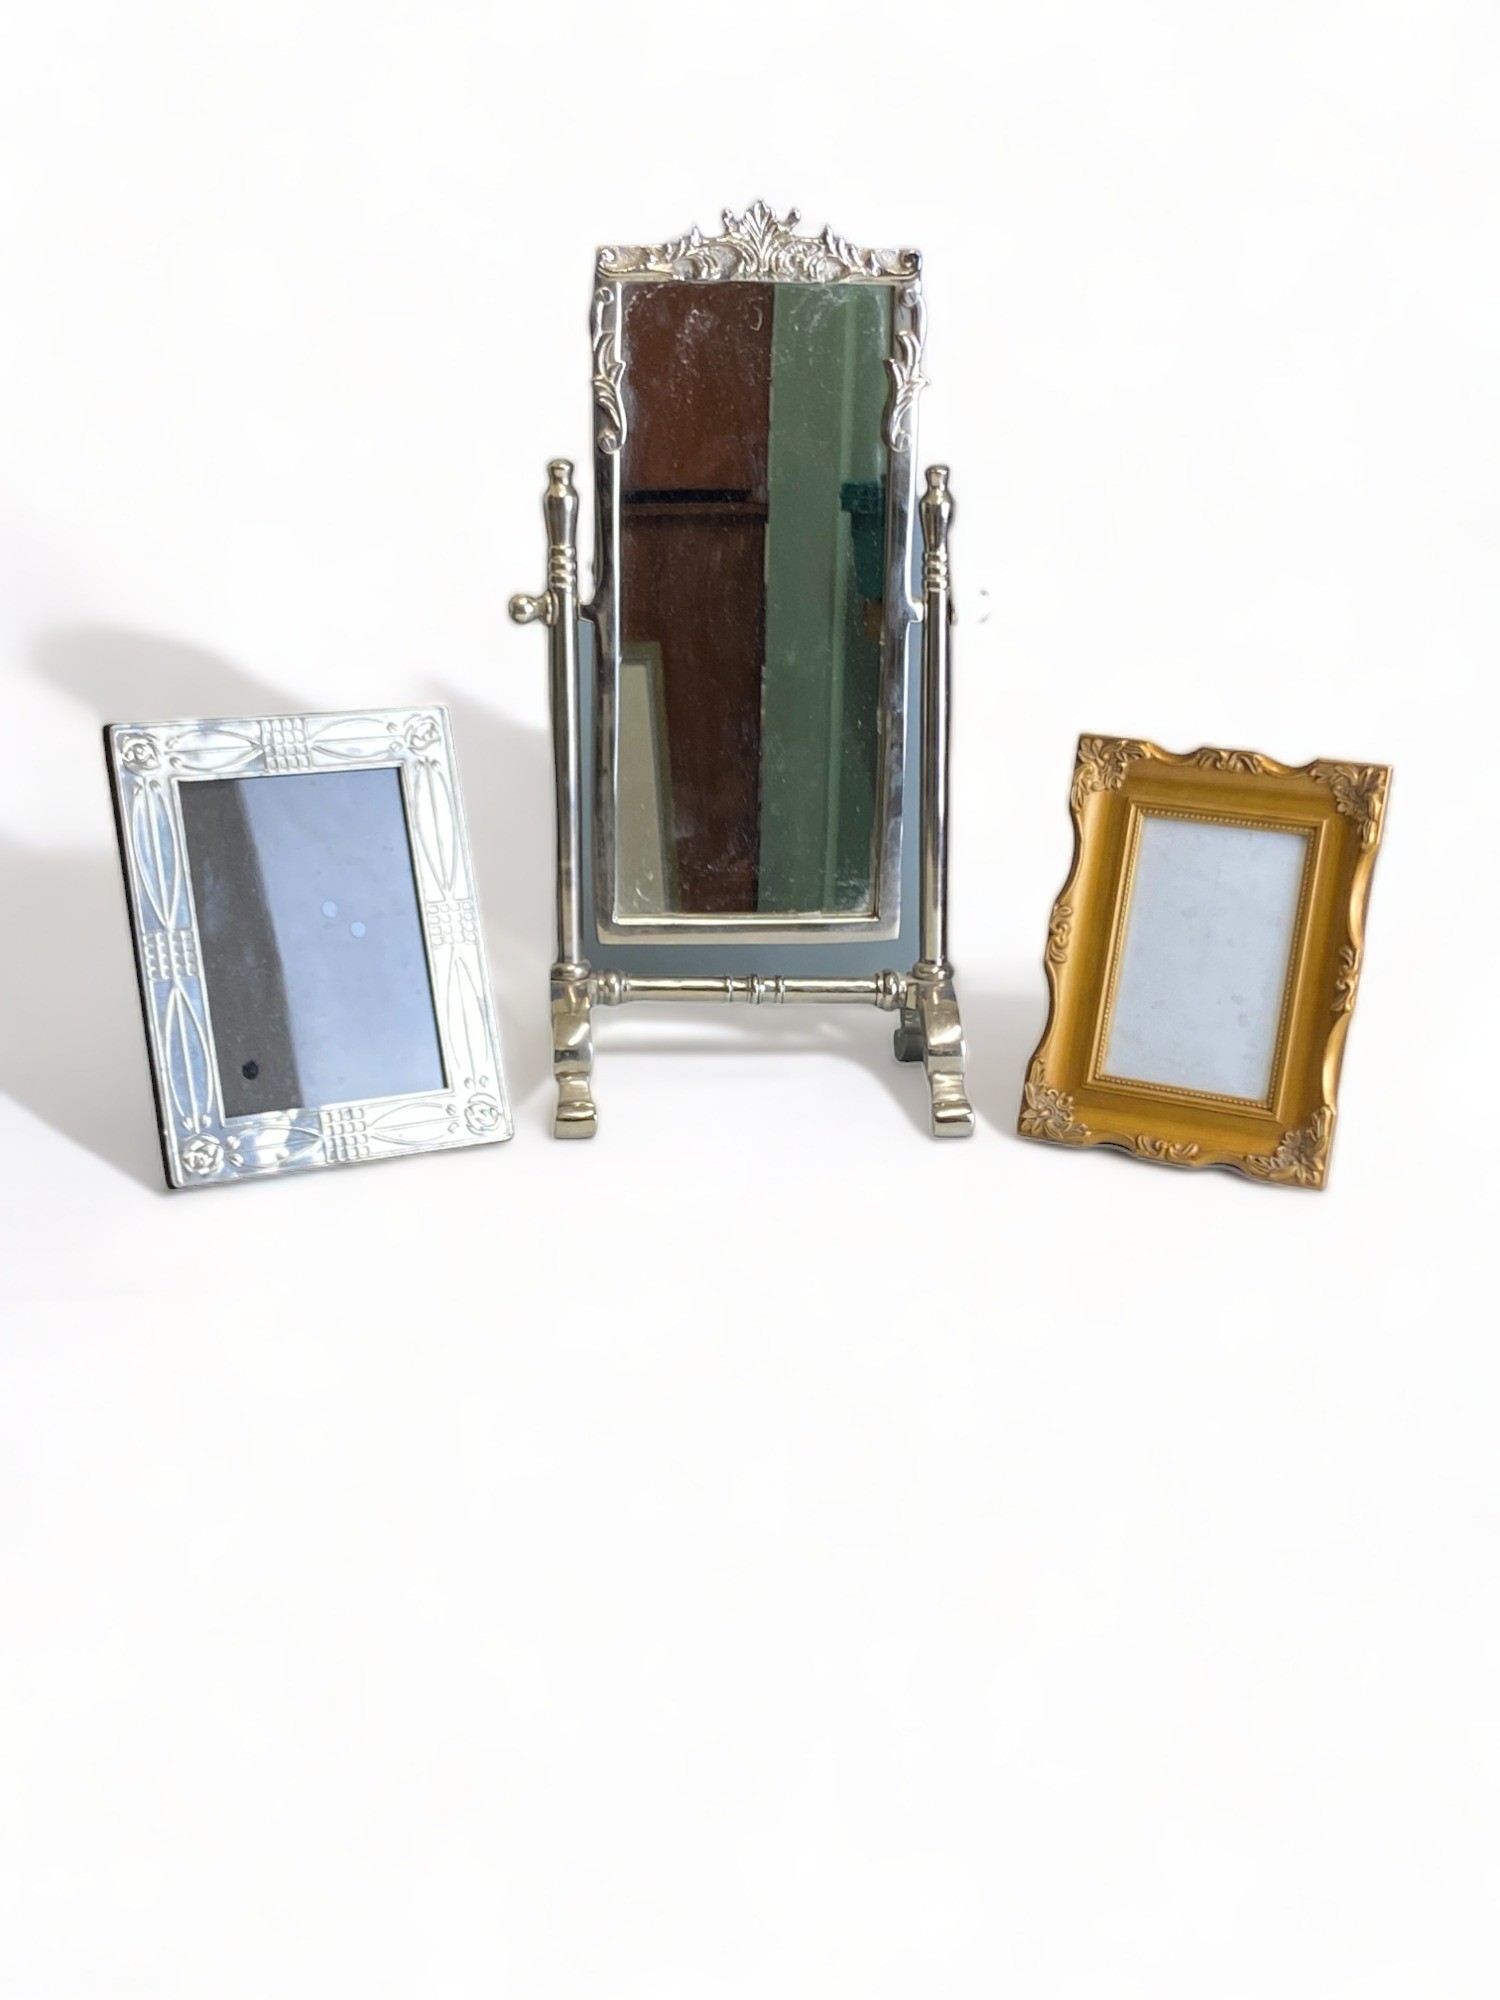 A LARGE METAL DESKTOP MIRROR, AND TWO PICTURE FRAMES